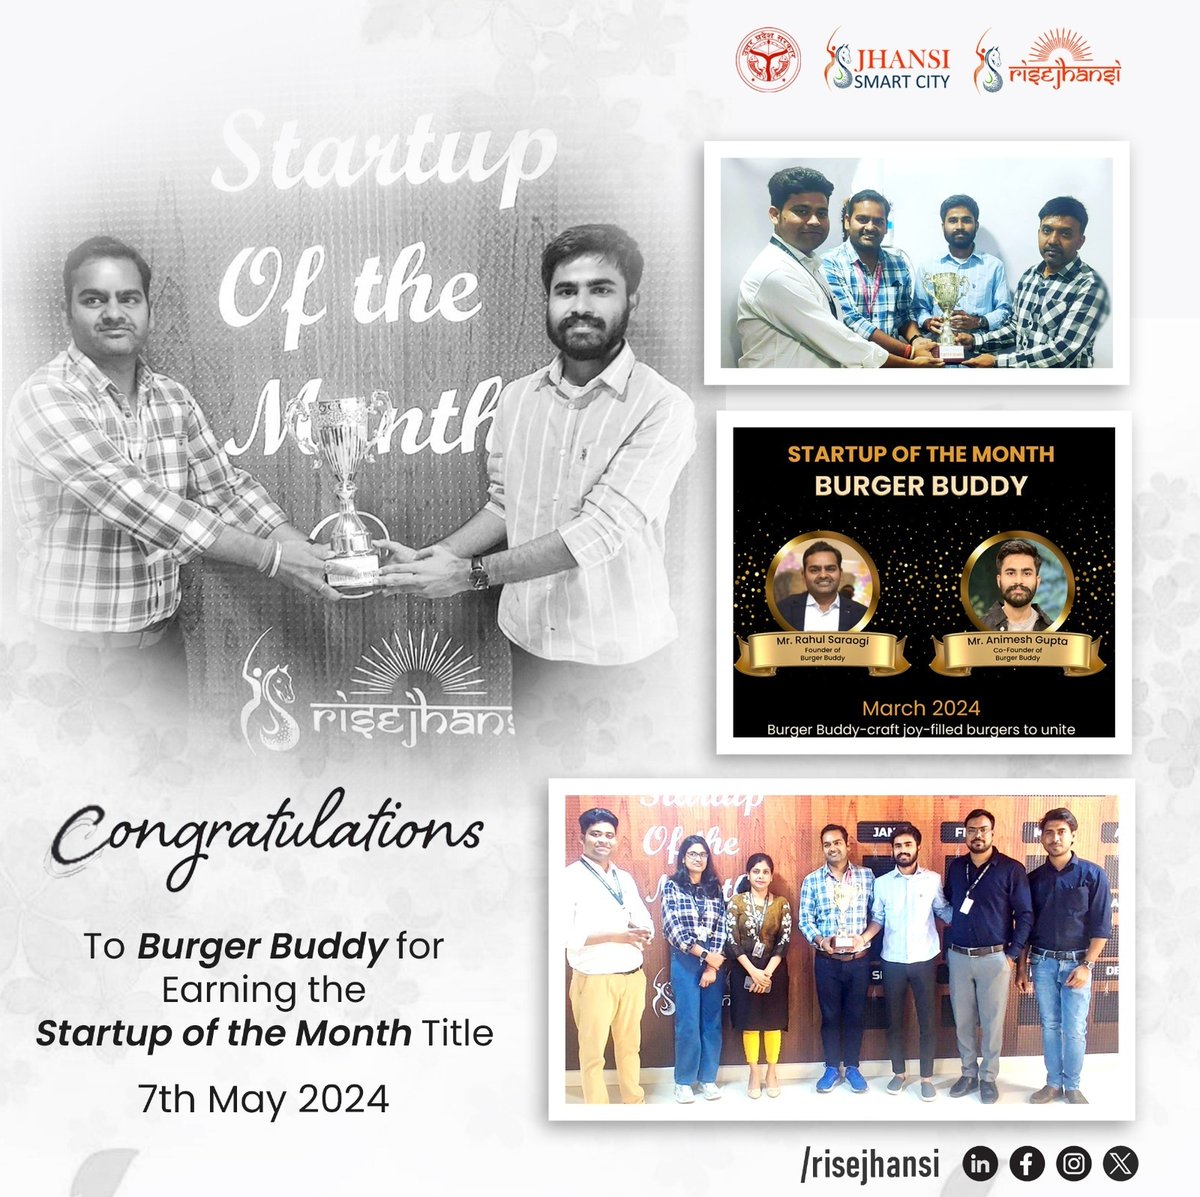 🎉Congratulations to BurgerBuddy, our Startup of the Month for March 2024 at RISE

BurgerBuddy has been making waves in the food tech industry with its innovative approach to personalized burgers & exceptional customer service. 
Congrats again to the entire BurgerBuddy team 🍔